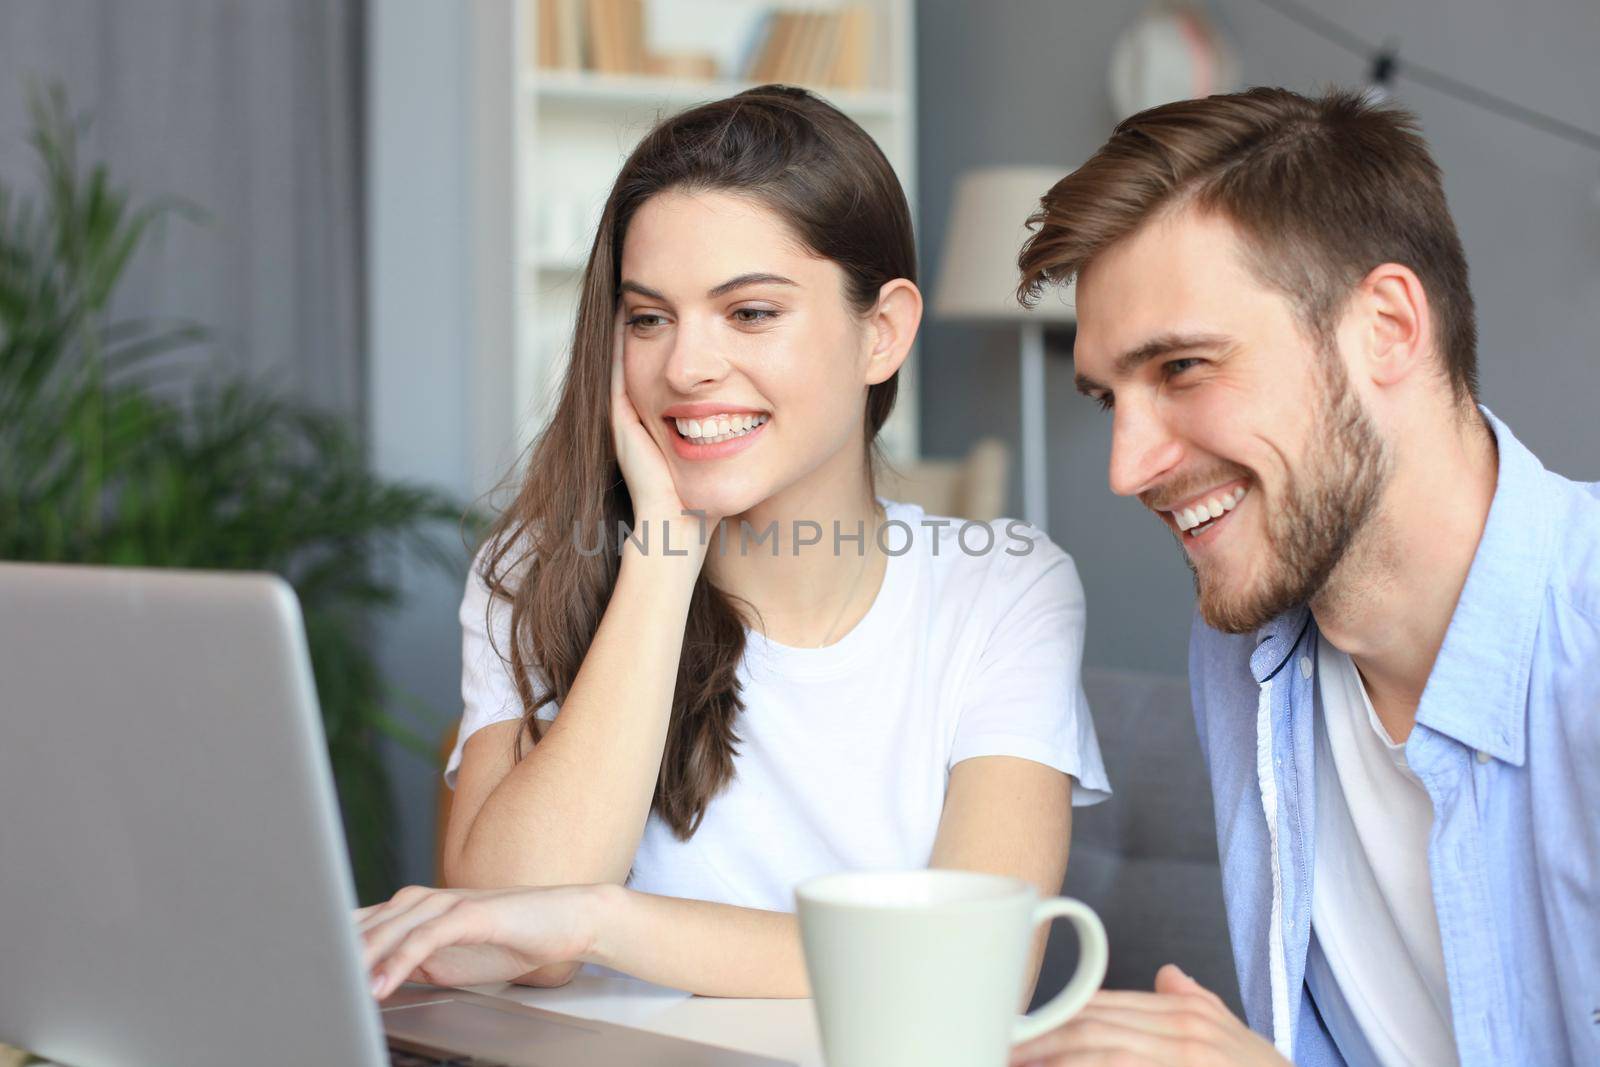 Couple pointing while working together on laptop